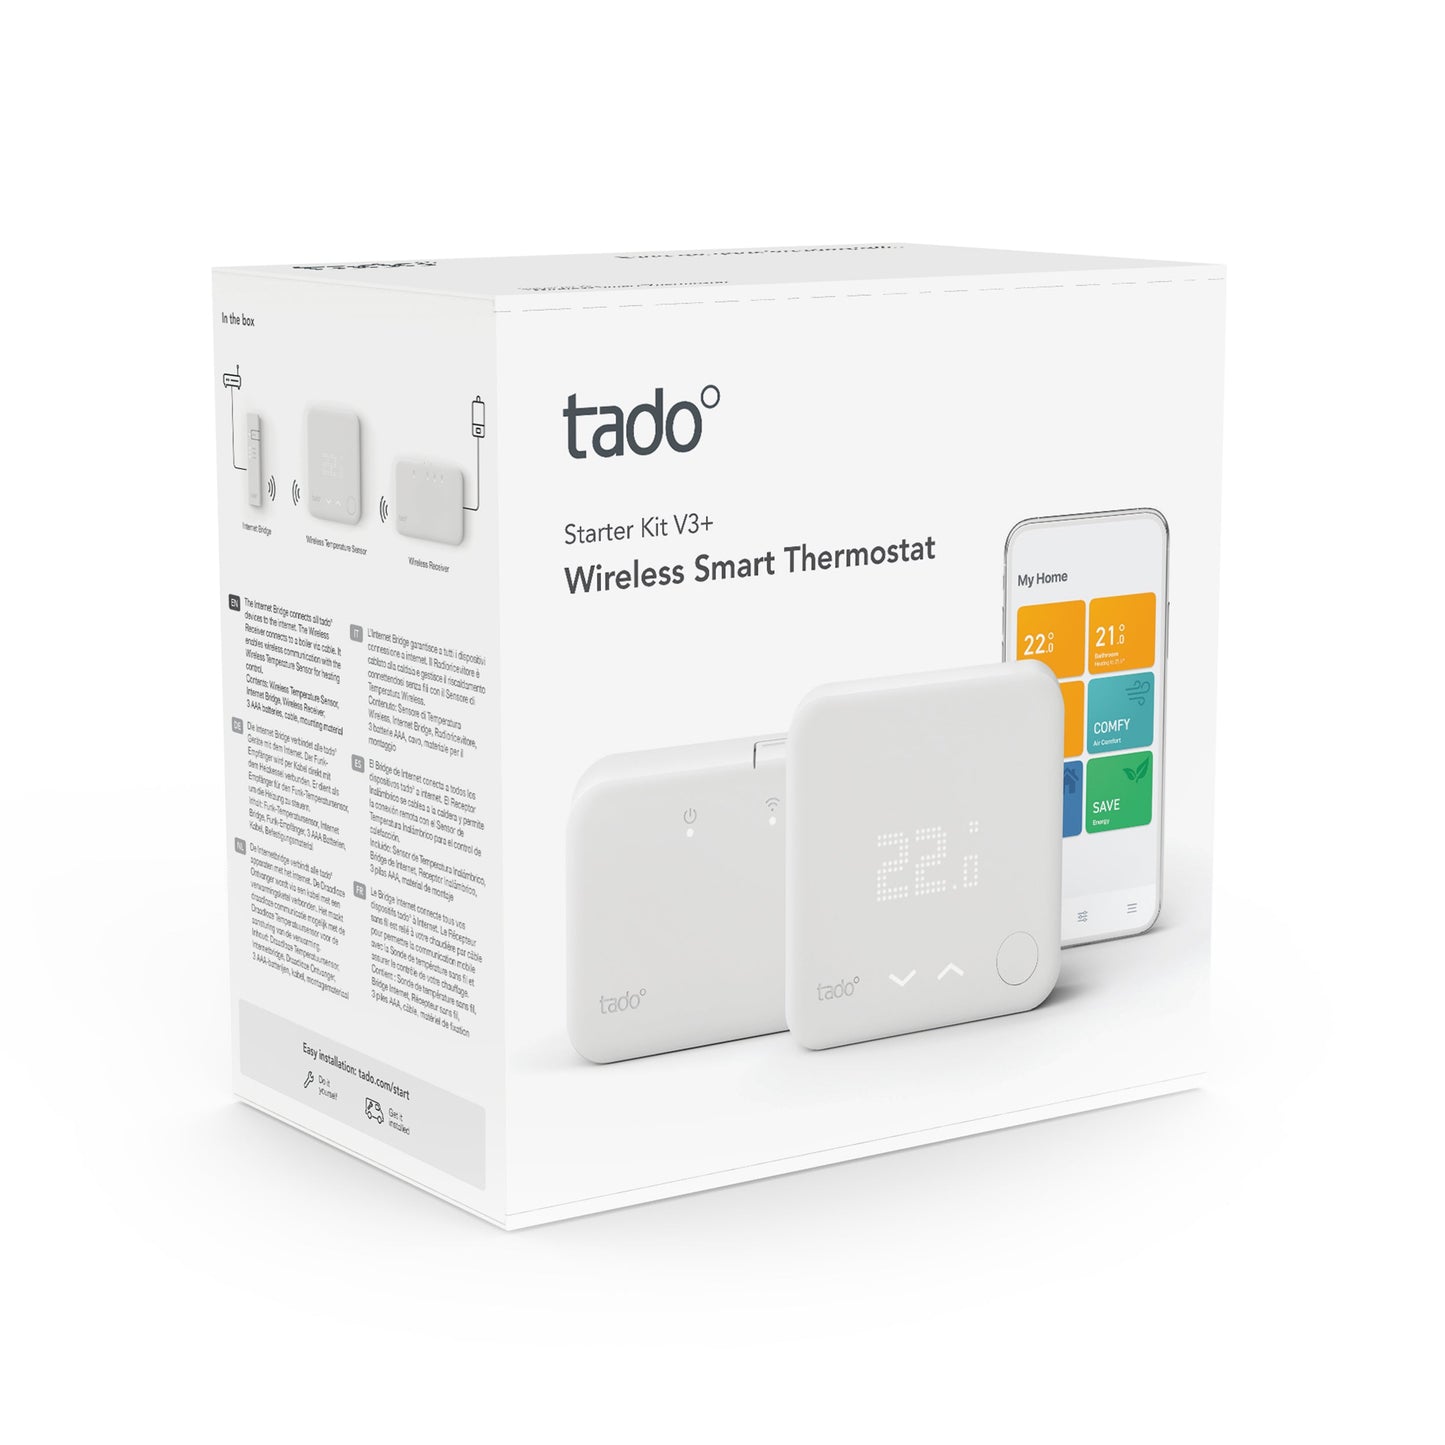 Wireless Smart Thermostat Starter Kit V3+ (EU Version, for Combi Boilers) incl. 12 months Auto-Assist